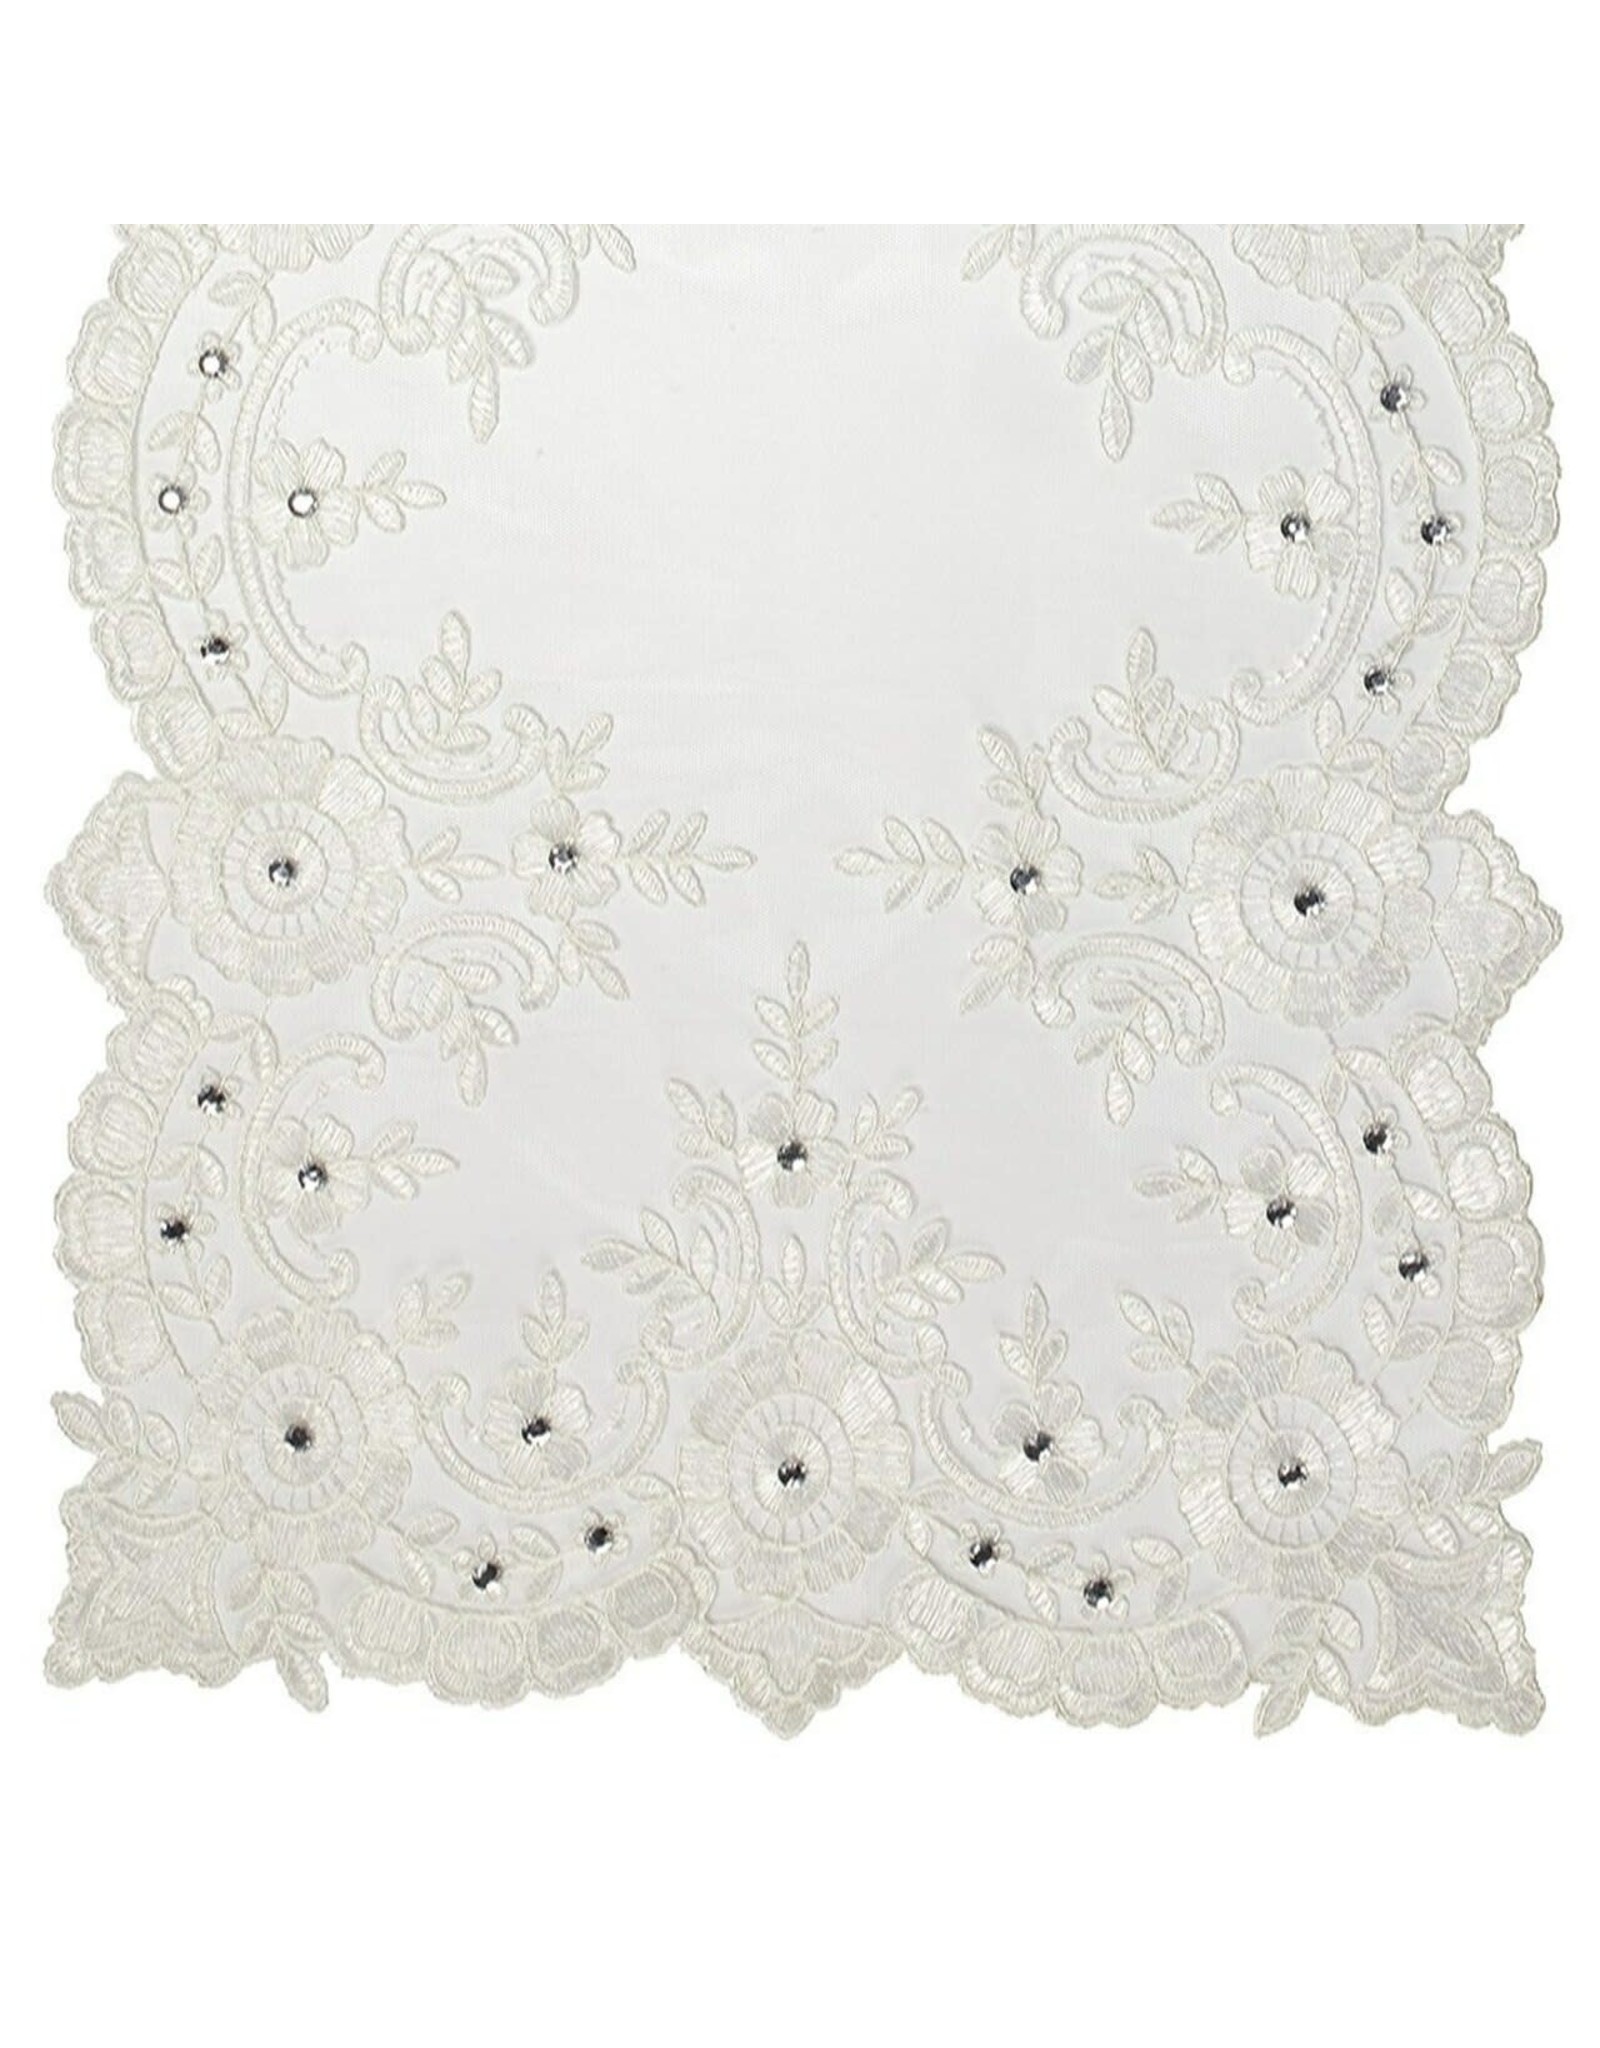 Precious Moments White Lace Elegance Table Runner